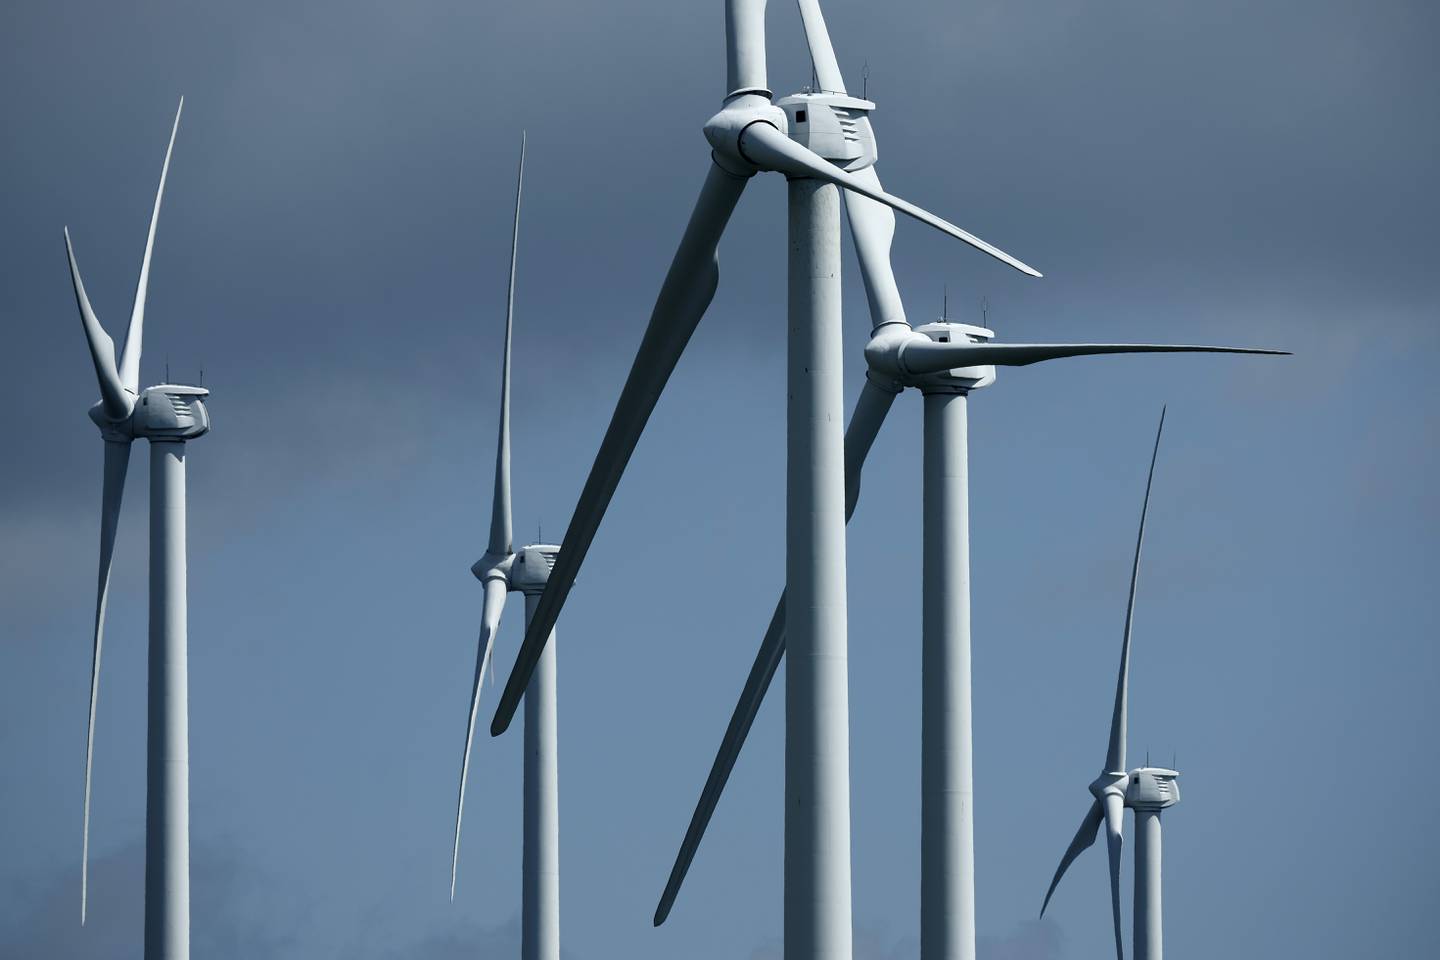 Turbines that are part of Constellation Energy's Criterion Wind Project stand along the ridge of Backbone Mountain on August 23, 2022 near Oakland, Maryland.